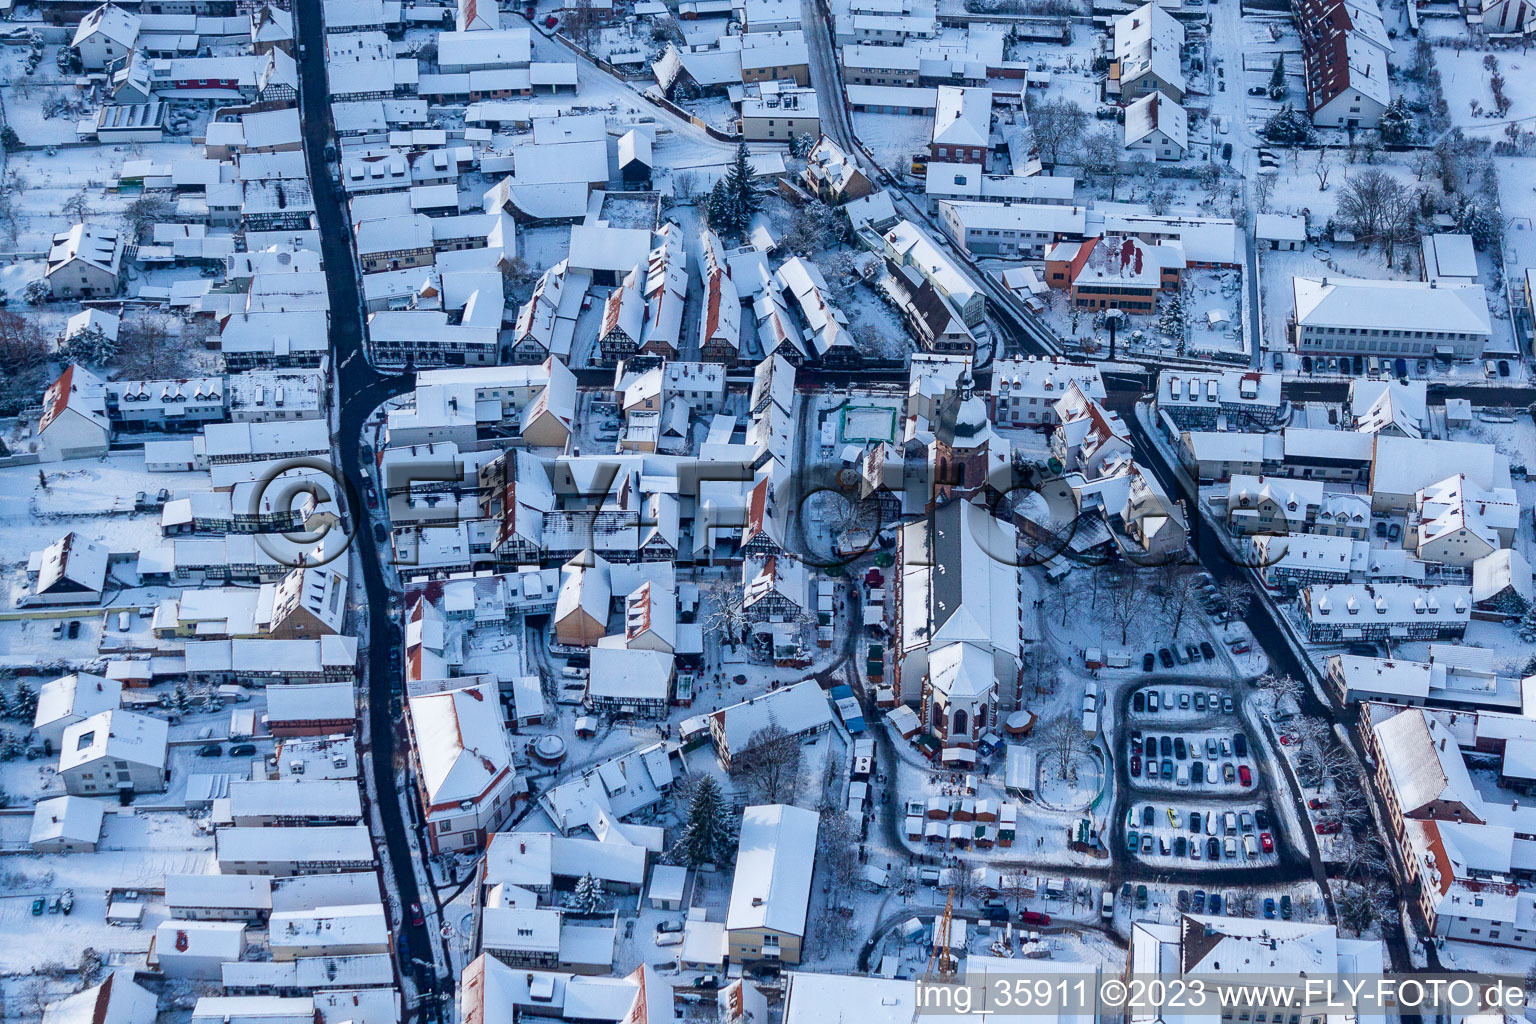 In the snow in Kandel in the state Rhineland-Palatinate, Germany viewn from the air